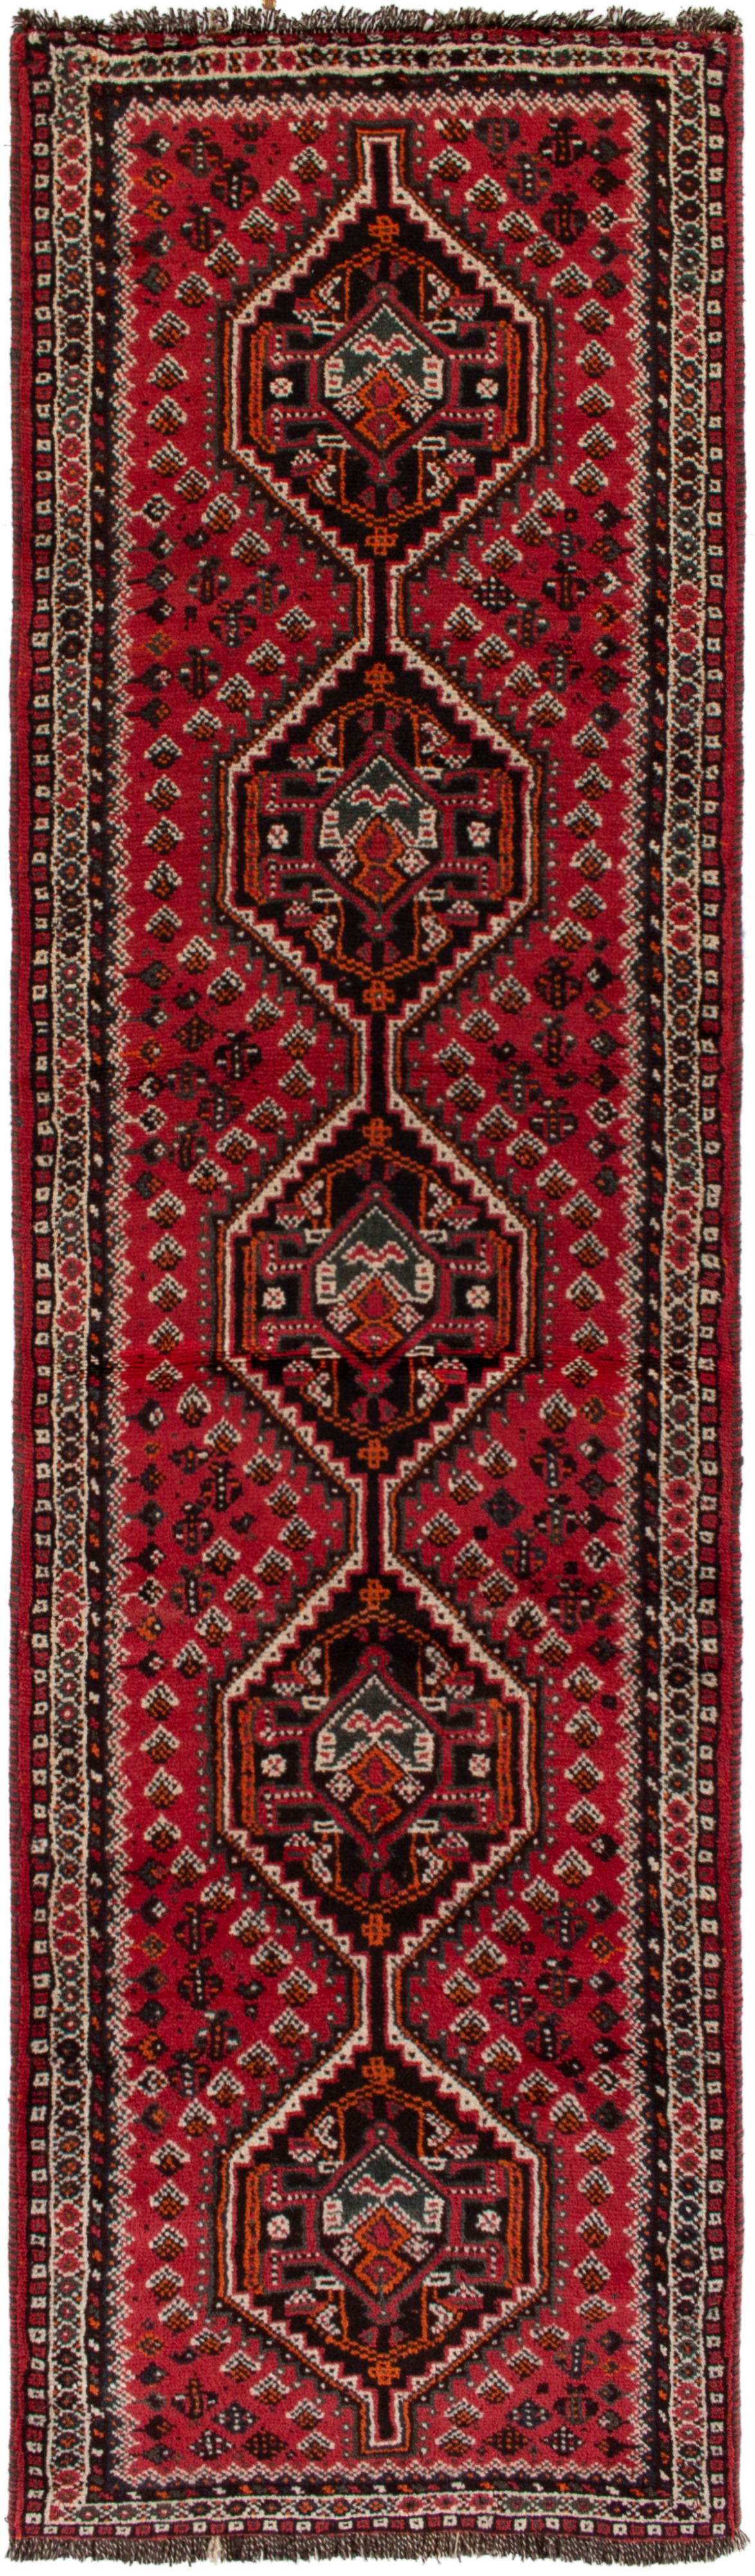 Hand-knotted Shiraz  Wool Rug 2'6" x 9'5" Size: 2'6" x 9'5"  